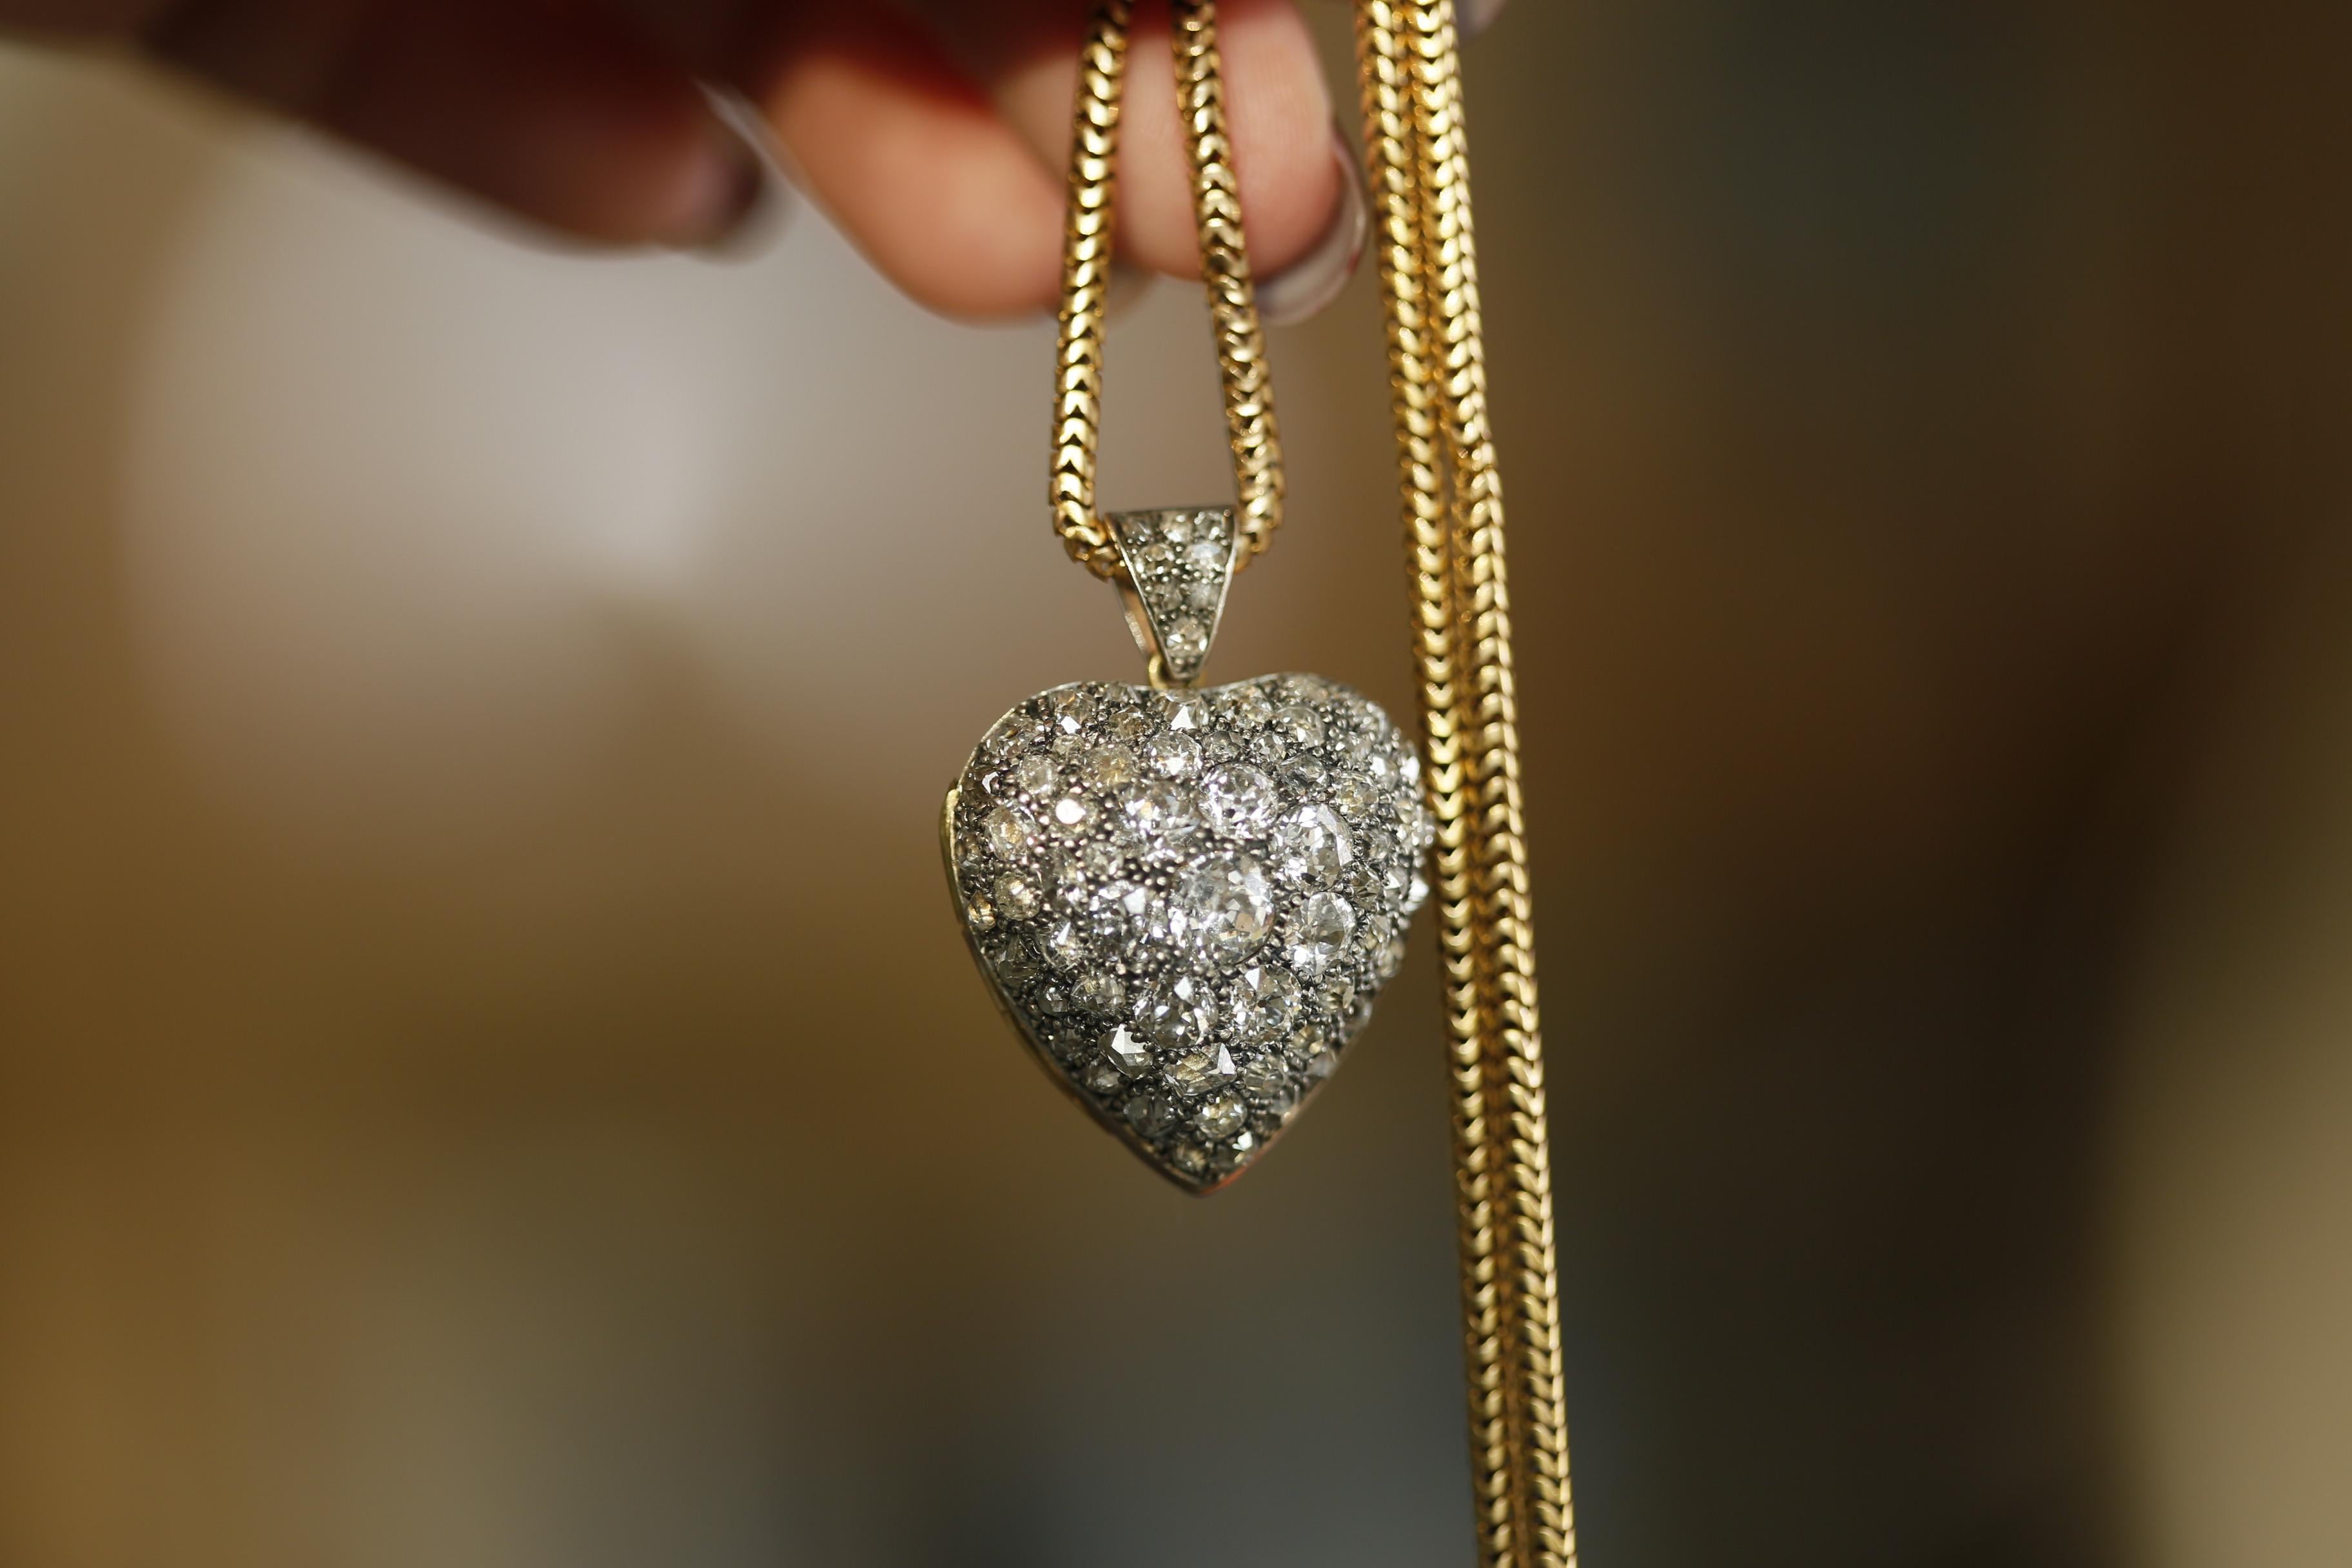 Pendant size：22mm x 19mm
Approx diamond weight: 4.15 carats
Chain length: 42cm
Total weight: 22.28g

This is such a wearable pendant. You will find yourself reaching for this in your jewellery box day after day. The front of the locket is encrusted